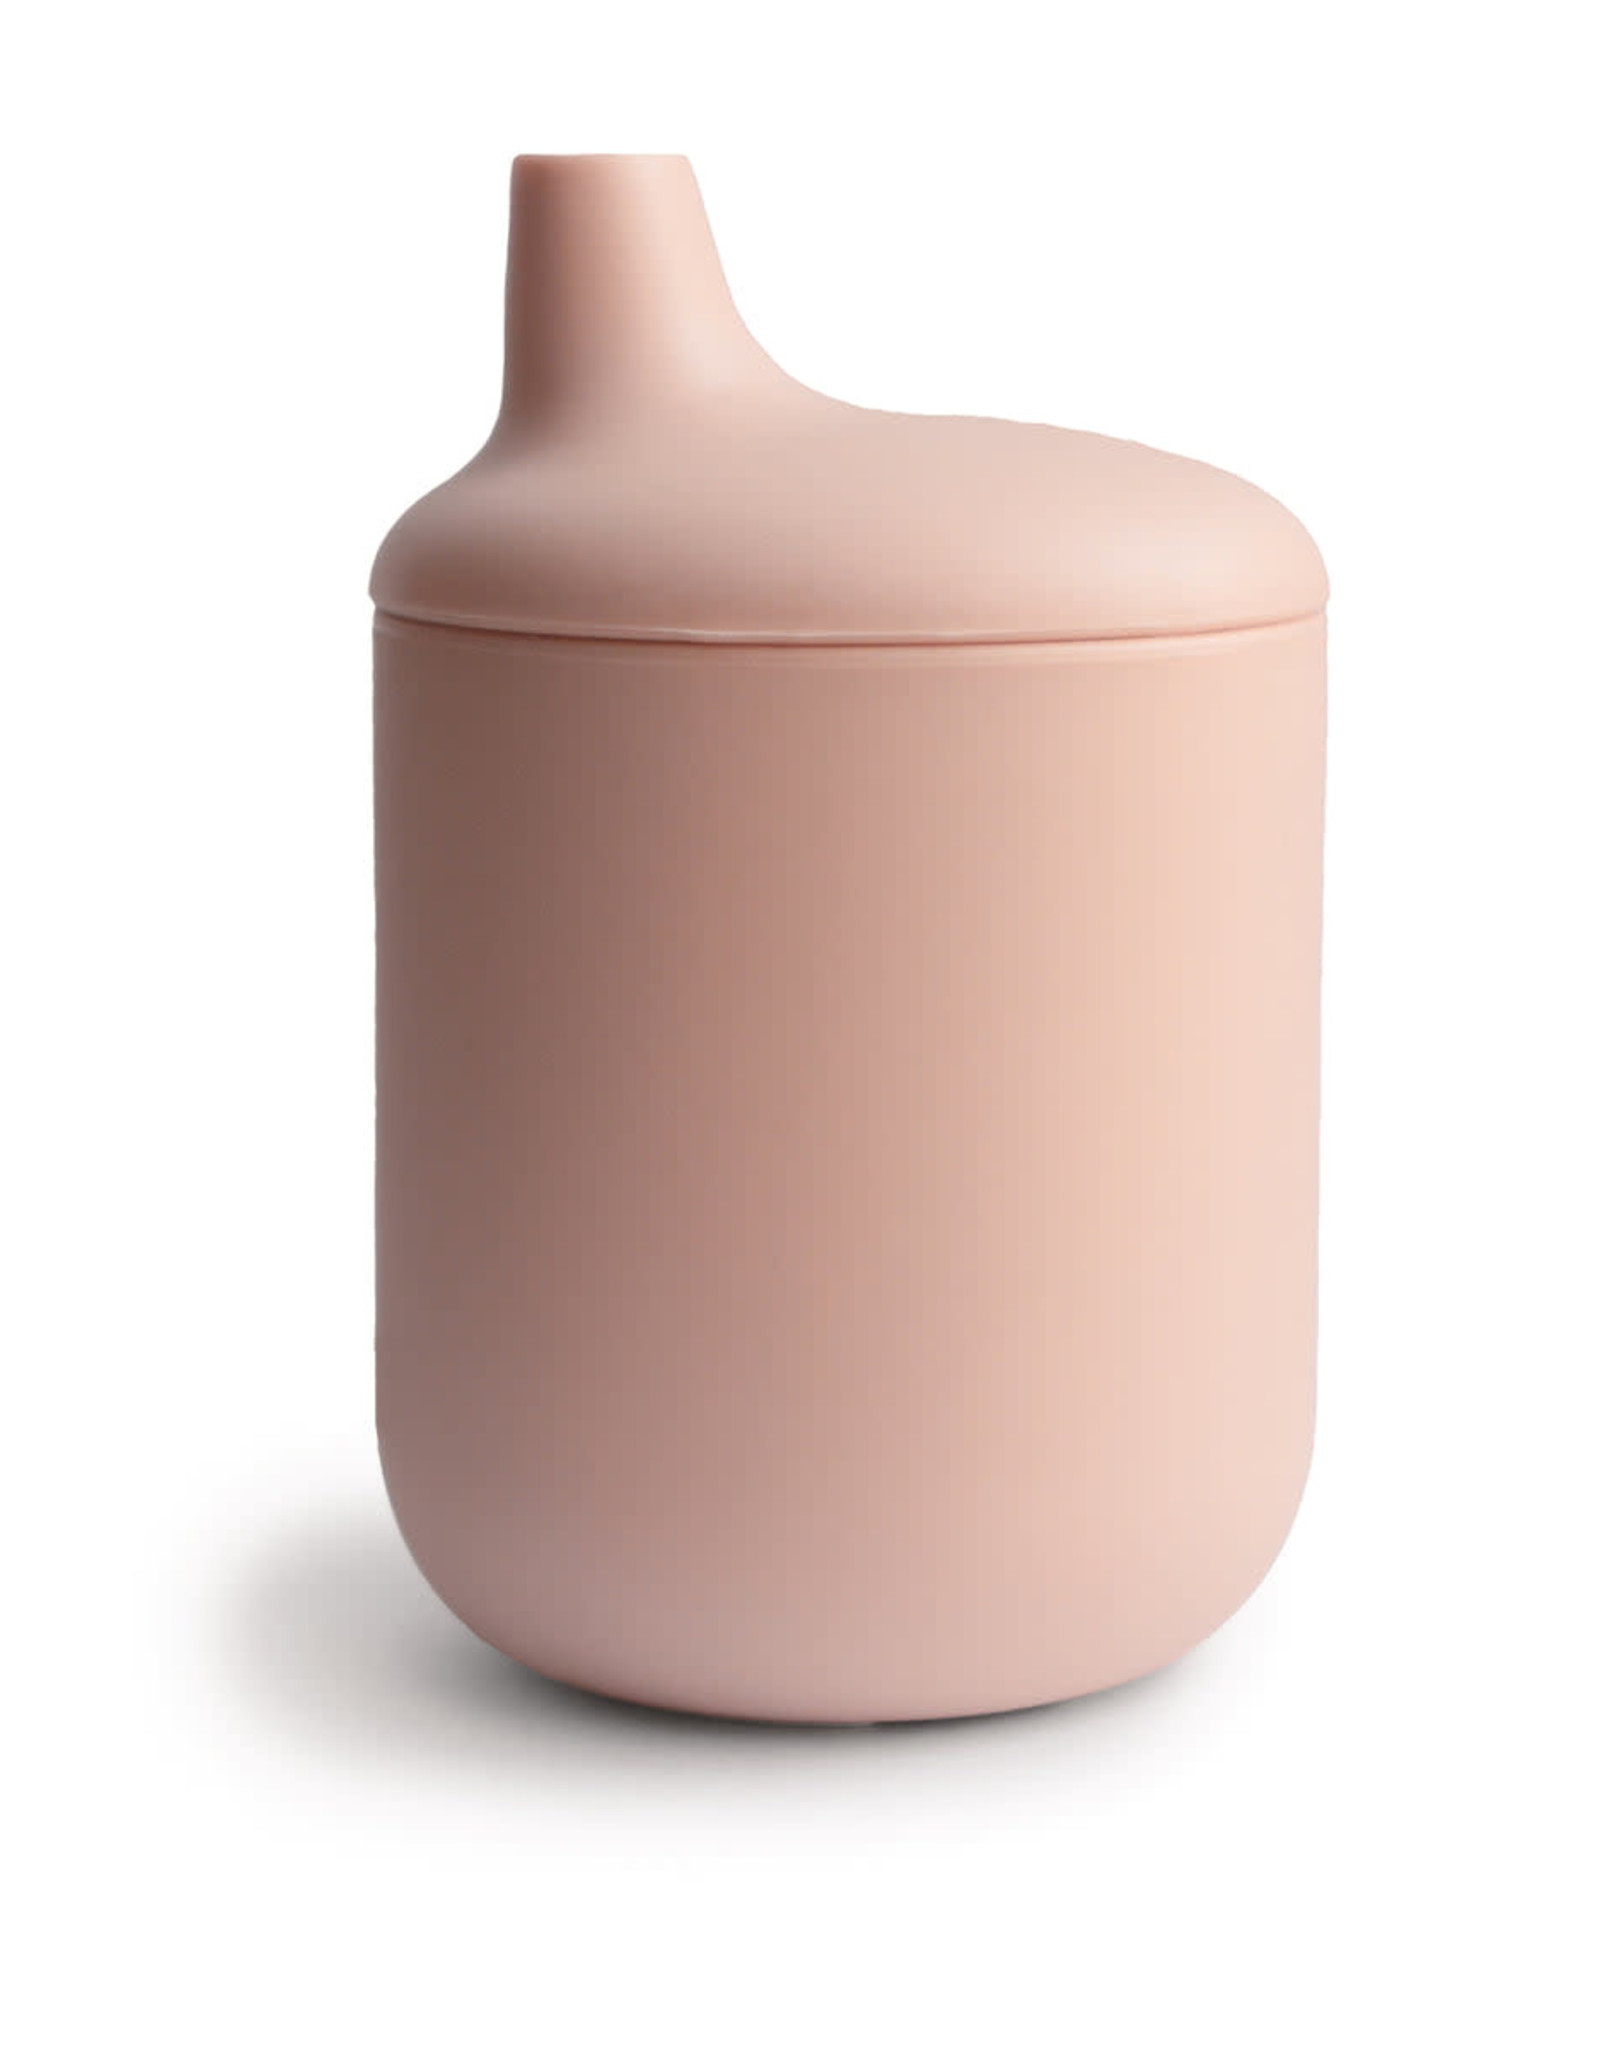 Mushie silicone sippy cup- blush